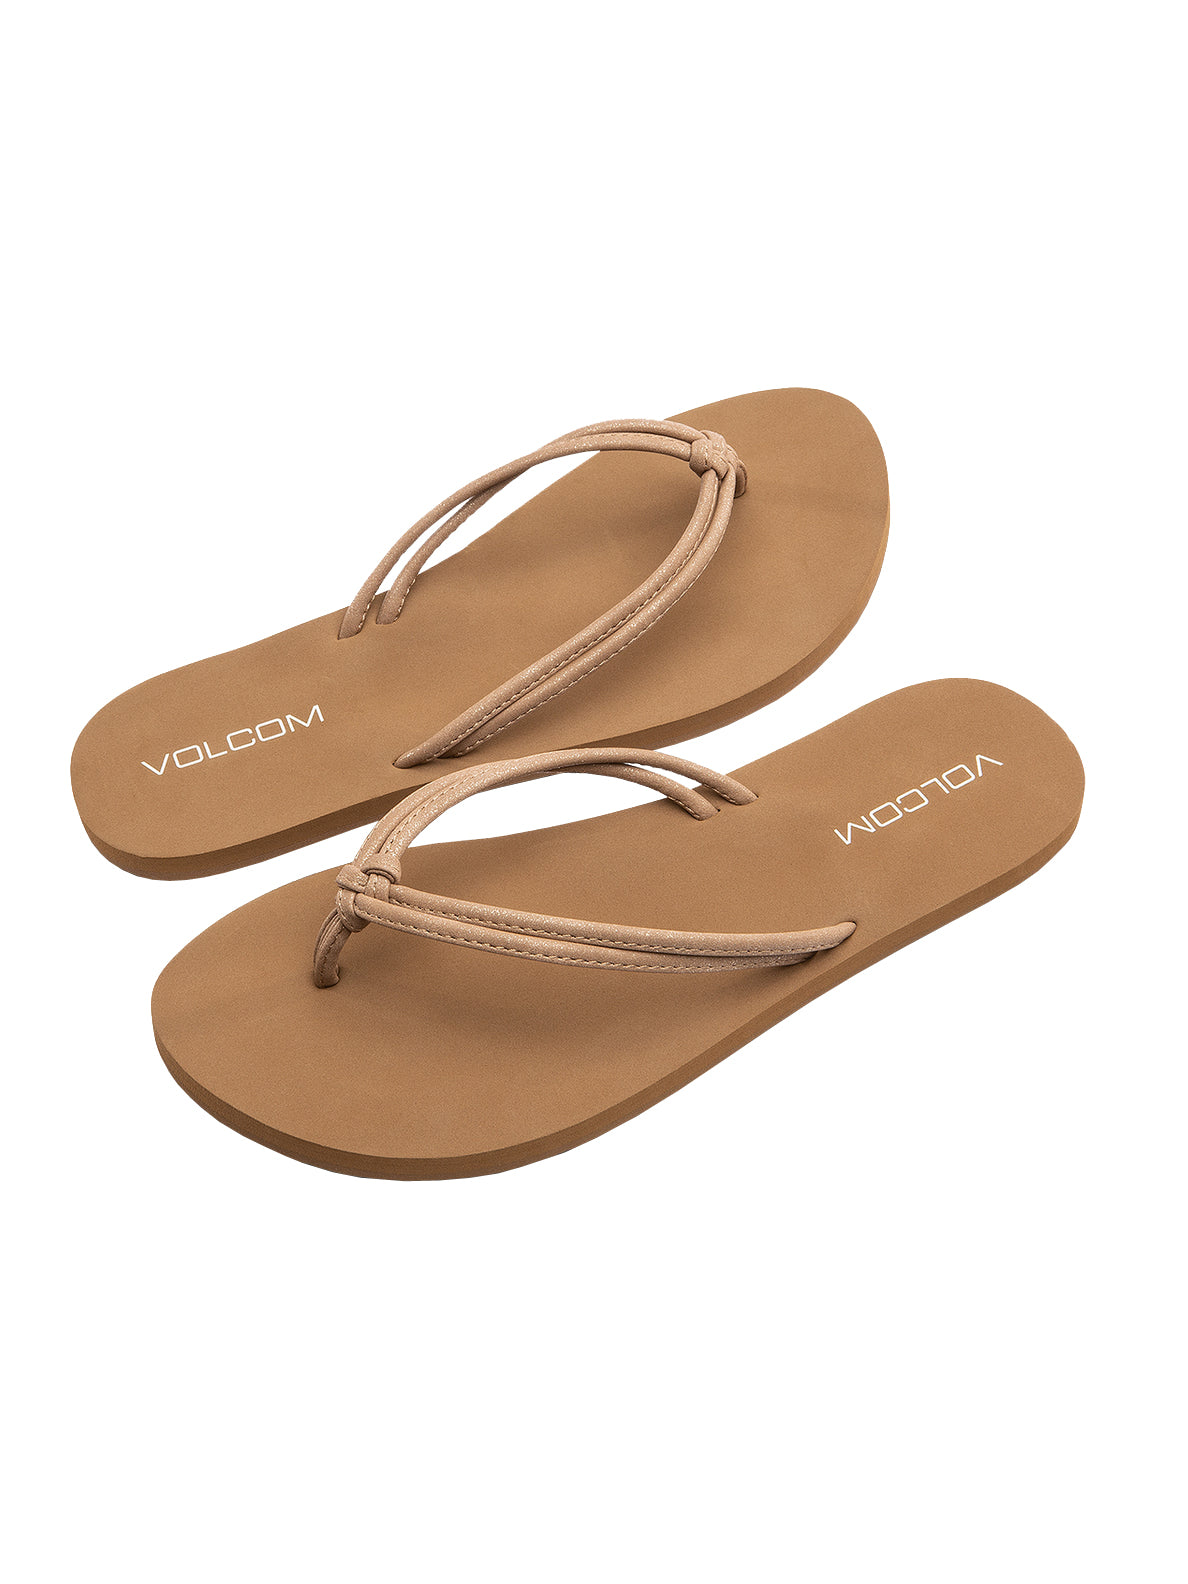 Volcom Forever and Ever 2 Womens Sandal TAN23-Tan 7